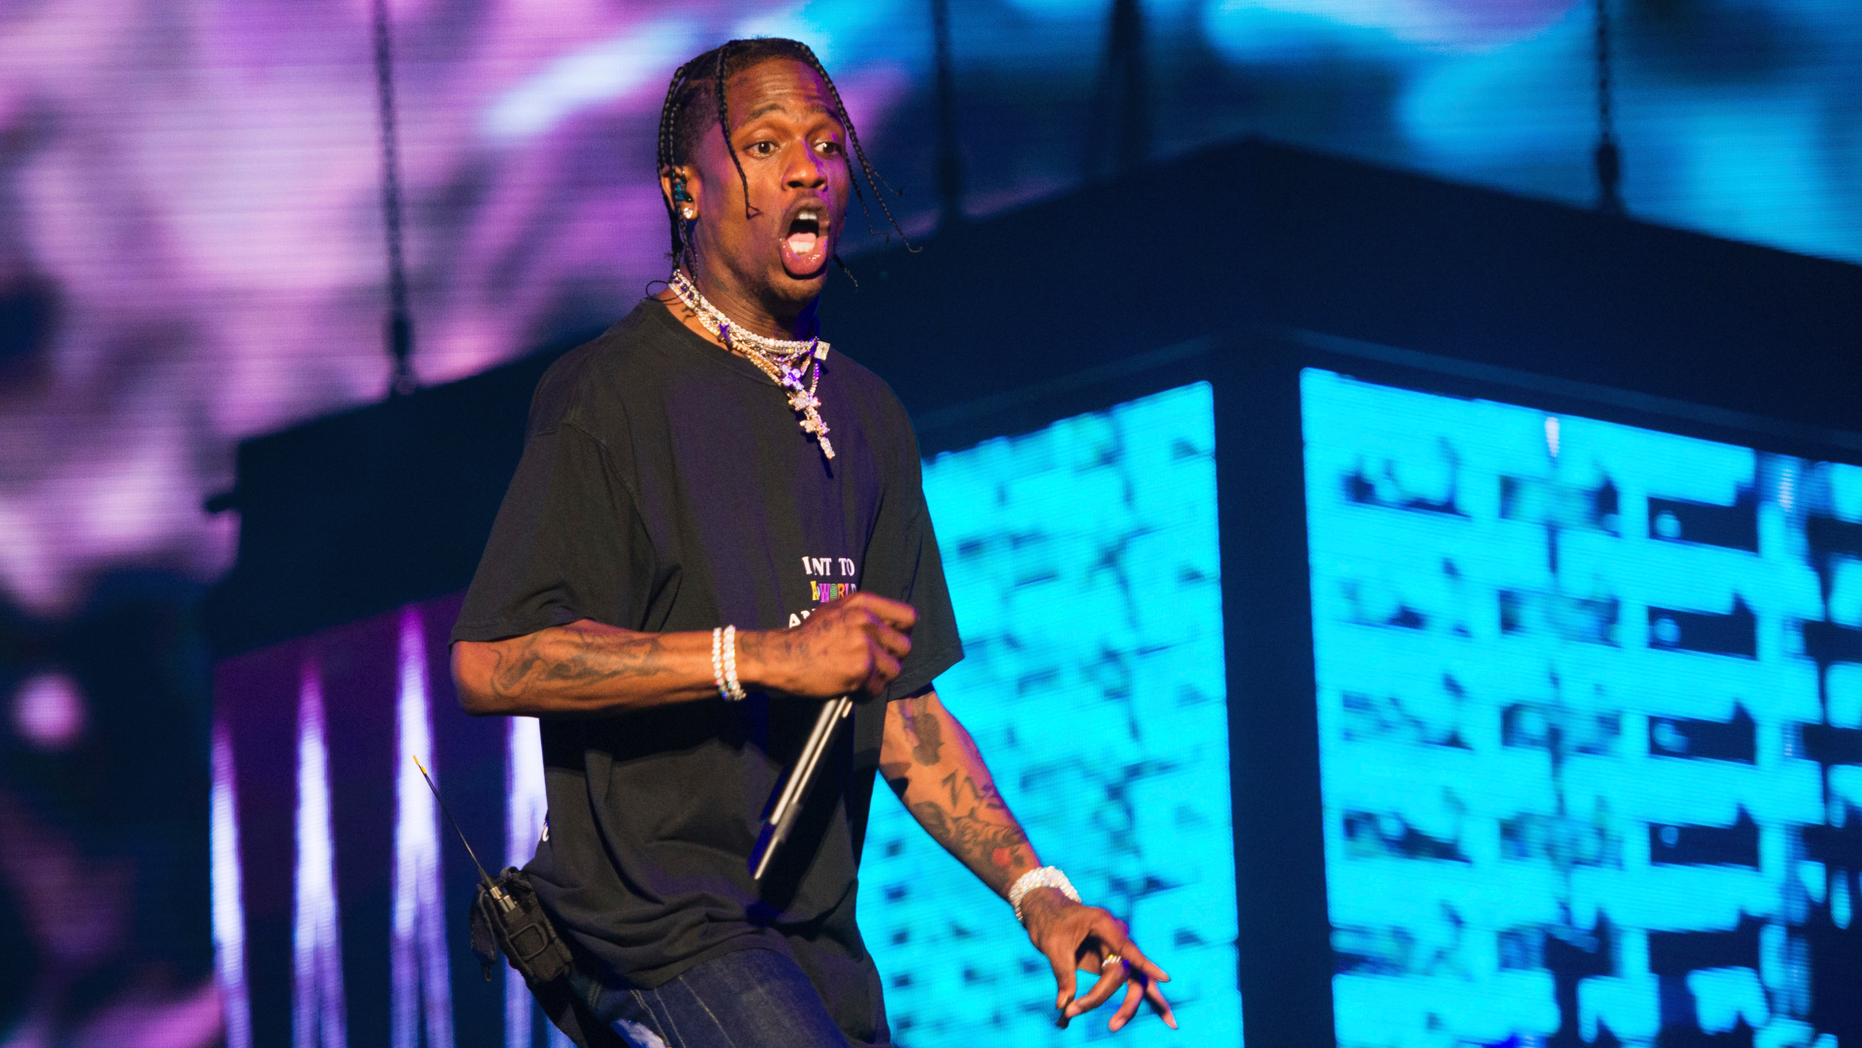 Travis Scott confirms Super Bowl Halftime performance with Maroon 5, announces partnership with NFL and DreamCorps